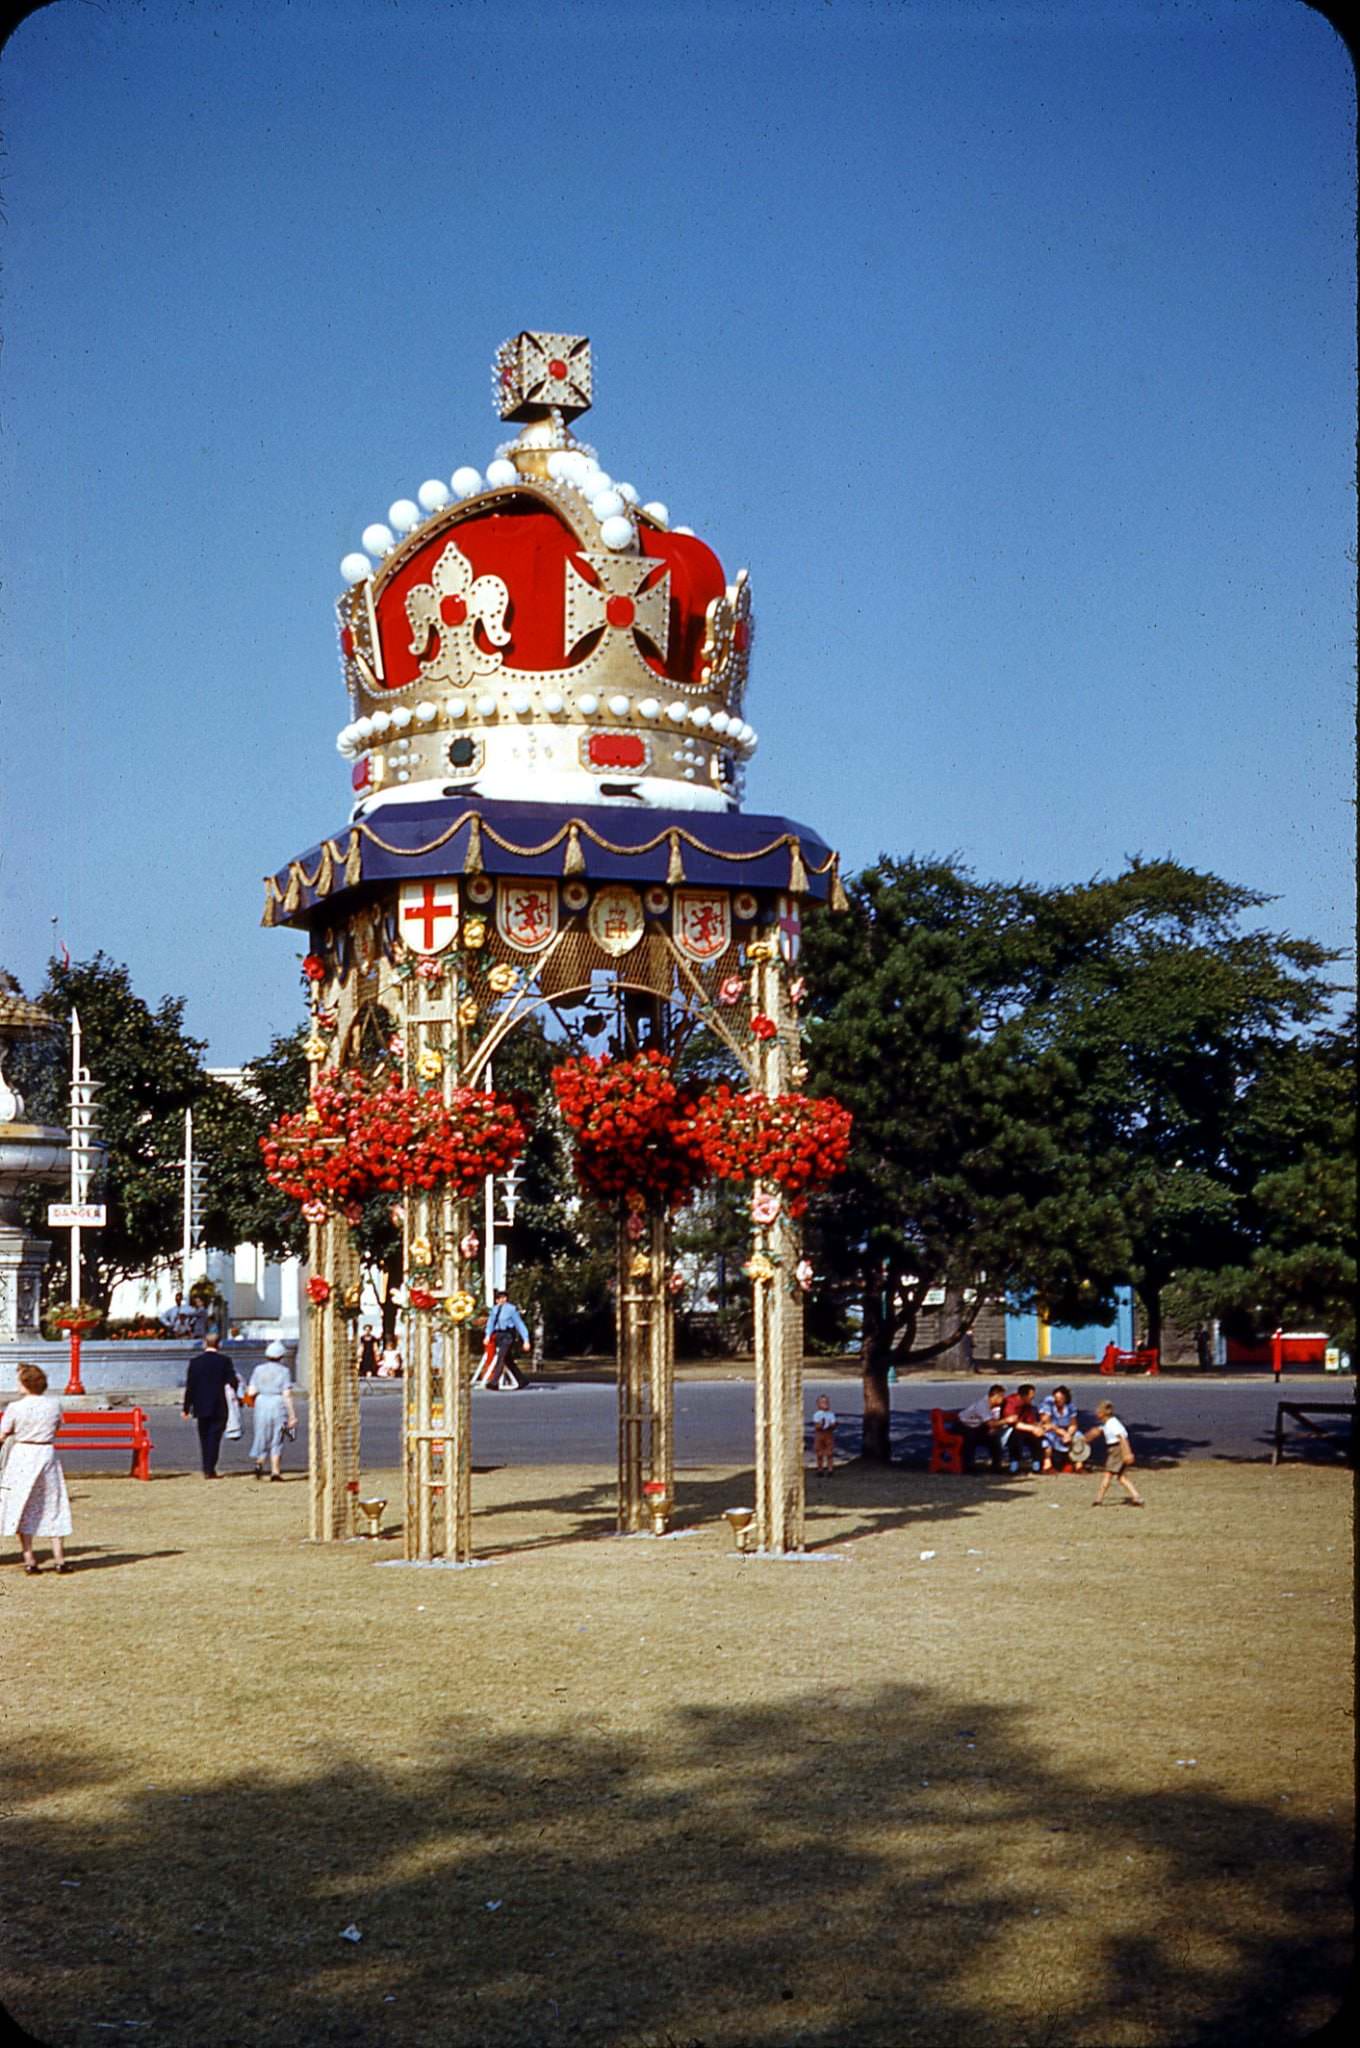 Here's a non-TTC slide that I purchased from John F. Knight last year showing the Queen Elizabeth II Coronation Crown Arch at the Canadian National Exhibition in 1953